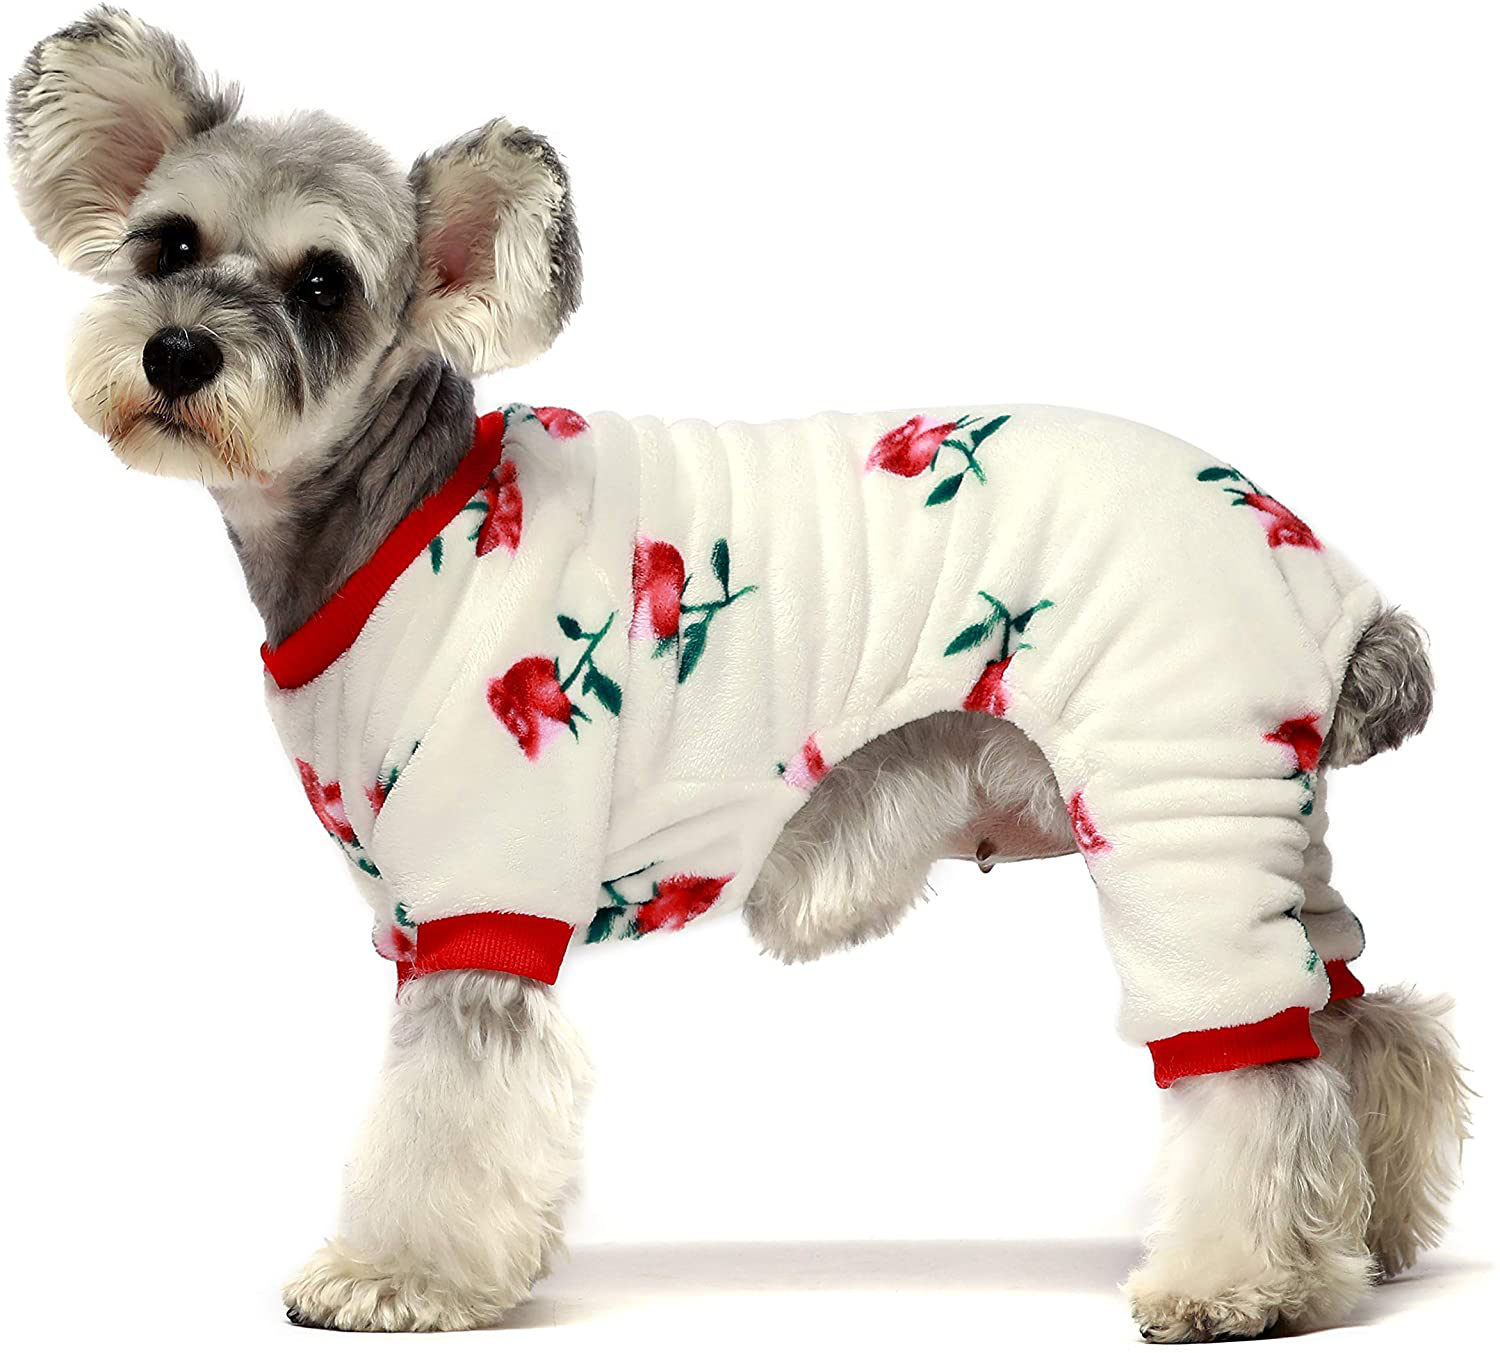 Fitwarm Thermal Pet Winter Clothes for Dog Pajamas Cat Onesies Jumpsuits Puppy Outfits Thick Velvet